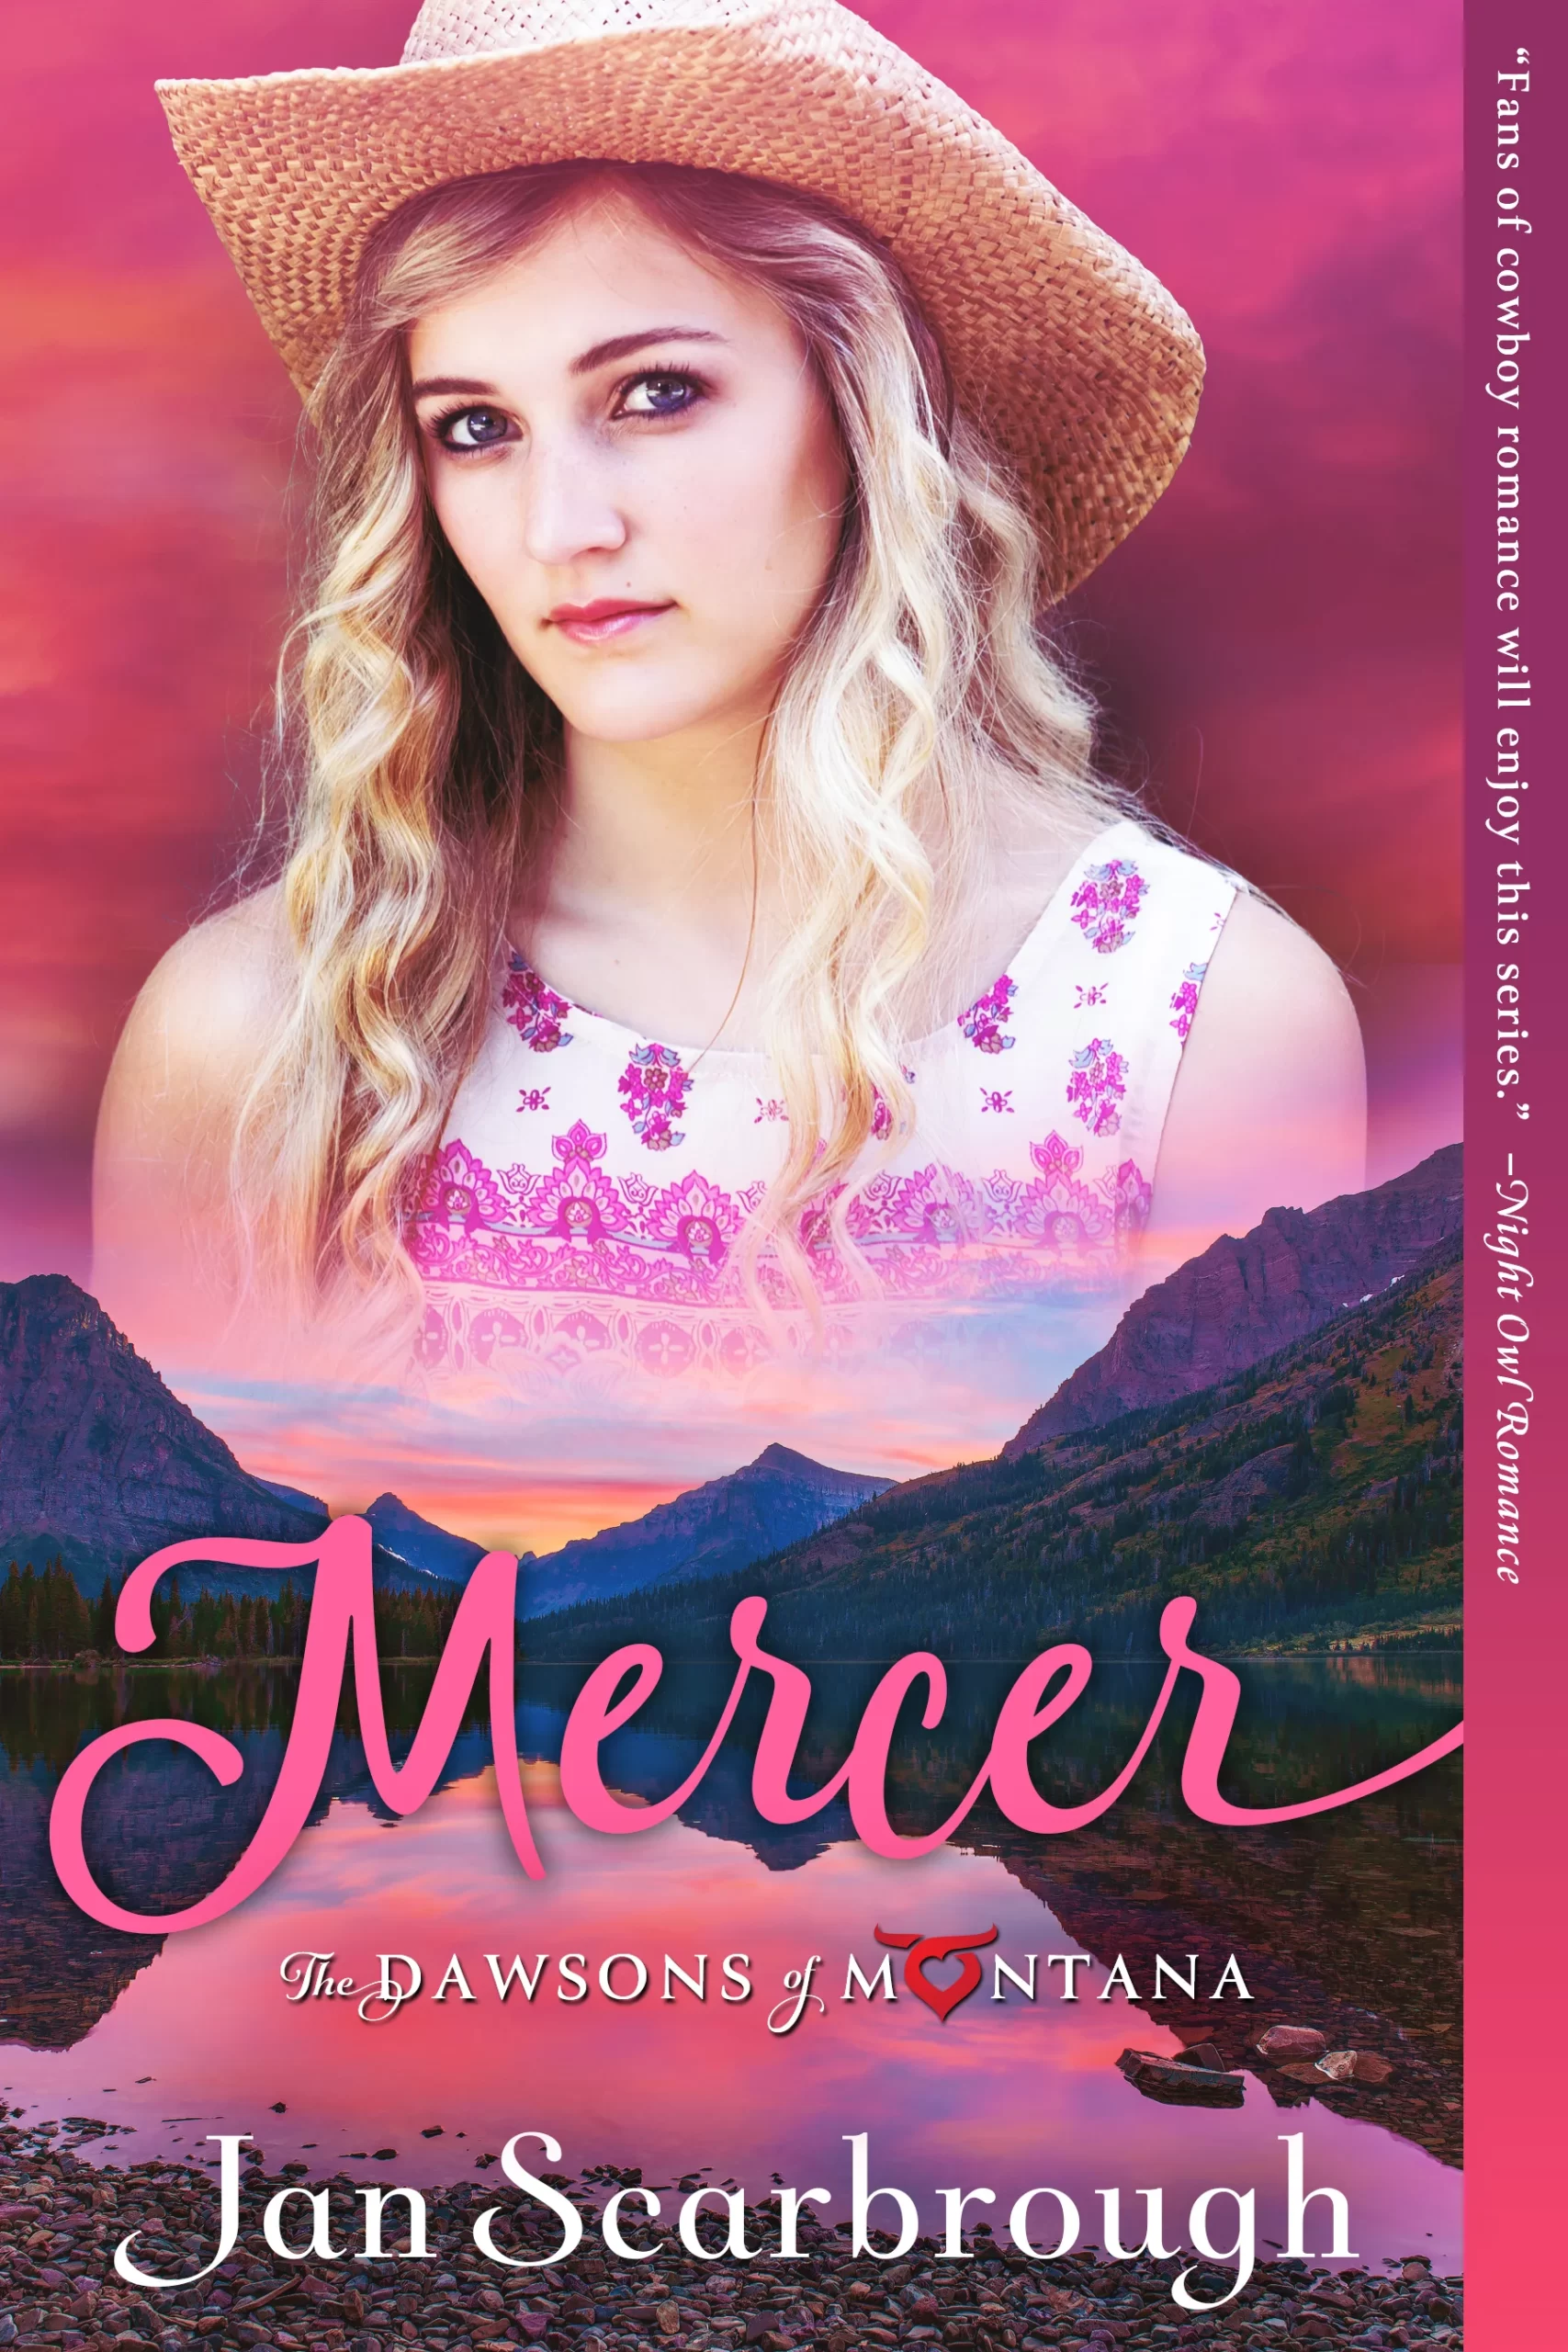 A book cover of "Mercer" by Jan Scarbrough with a blonde woman wearing a cowboy hat staring straight.